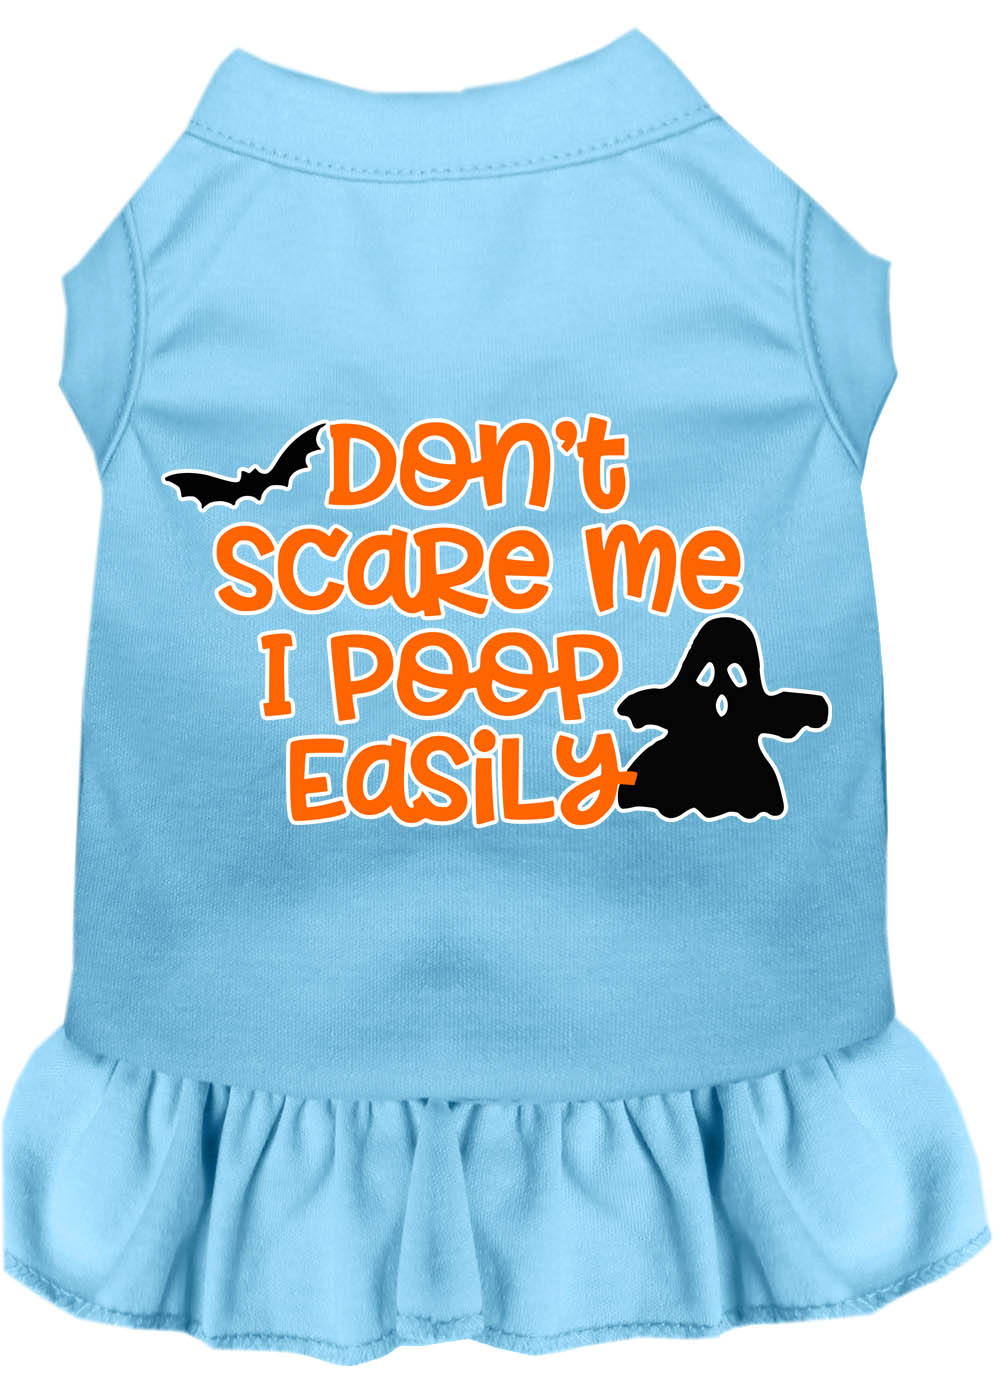 Don't Scare Me, Poops Easily Screen Print Dog Dress Baby Blue XXXL